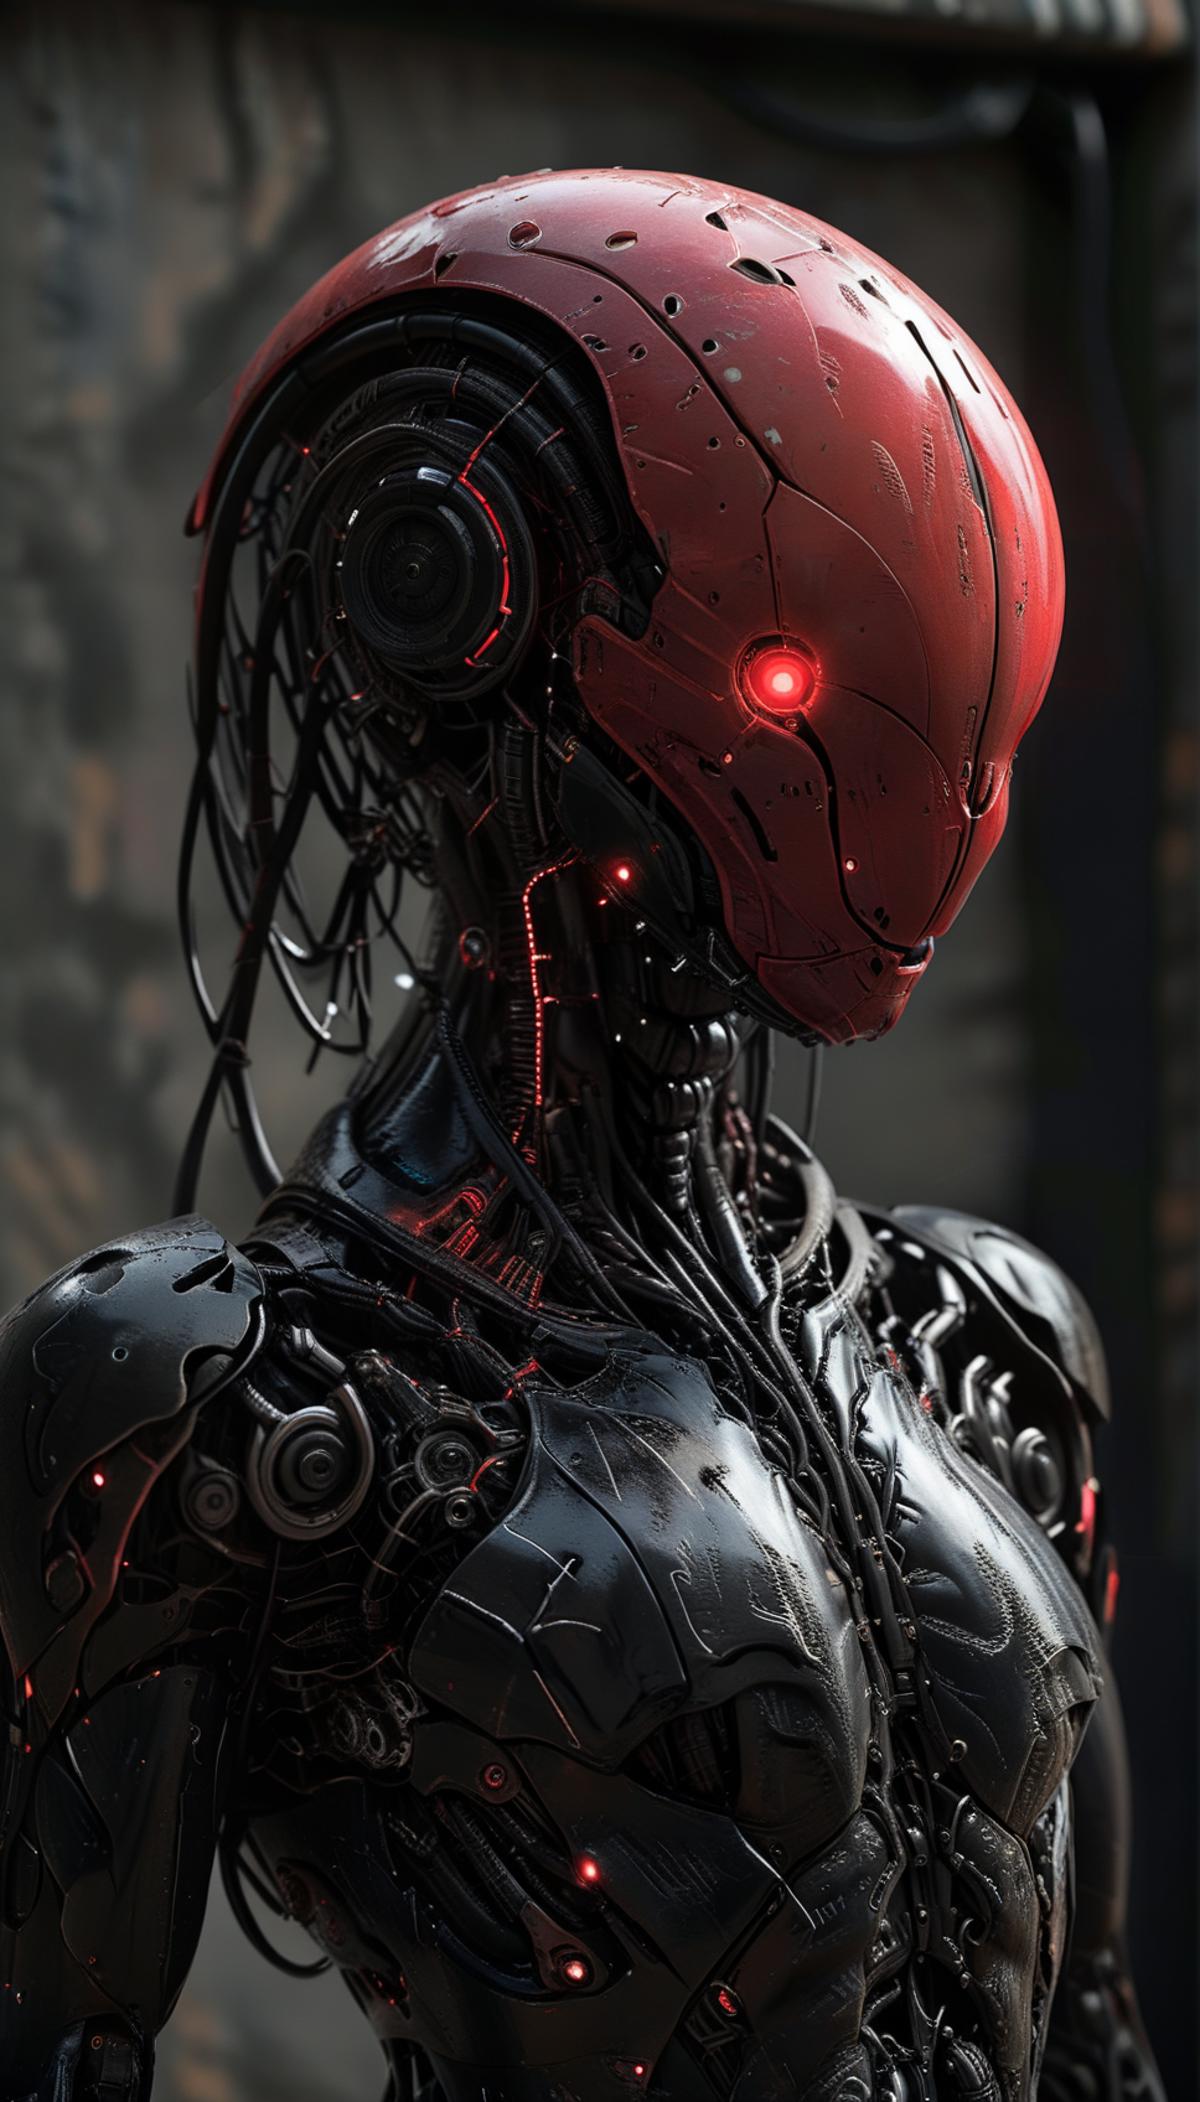 A futuristic robot head with red and black finish, glowing red eyes, and wire-like structures.